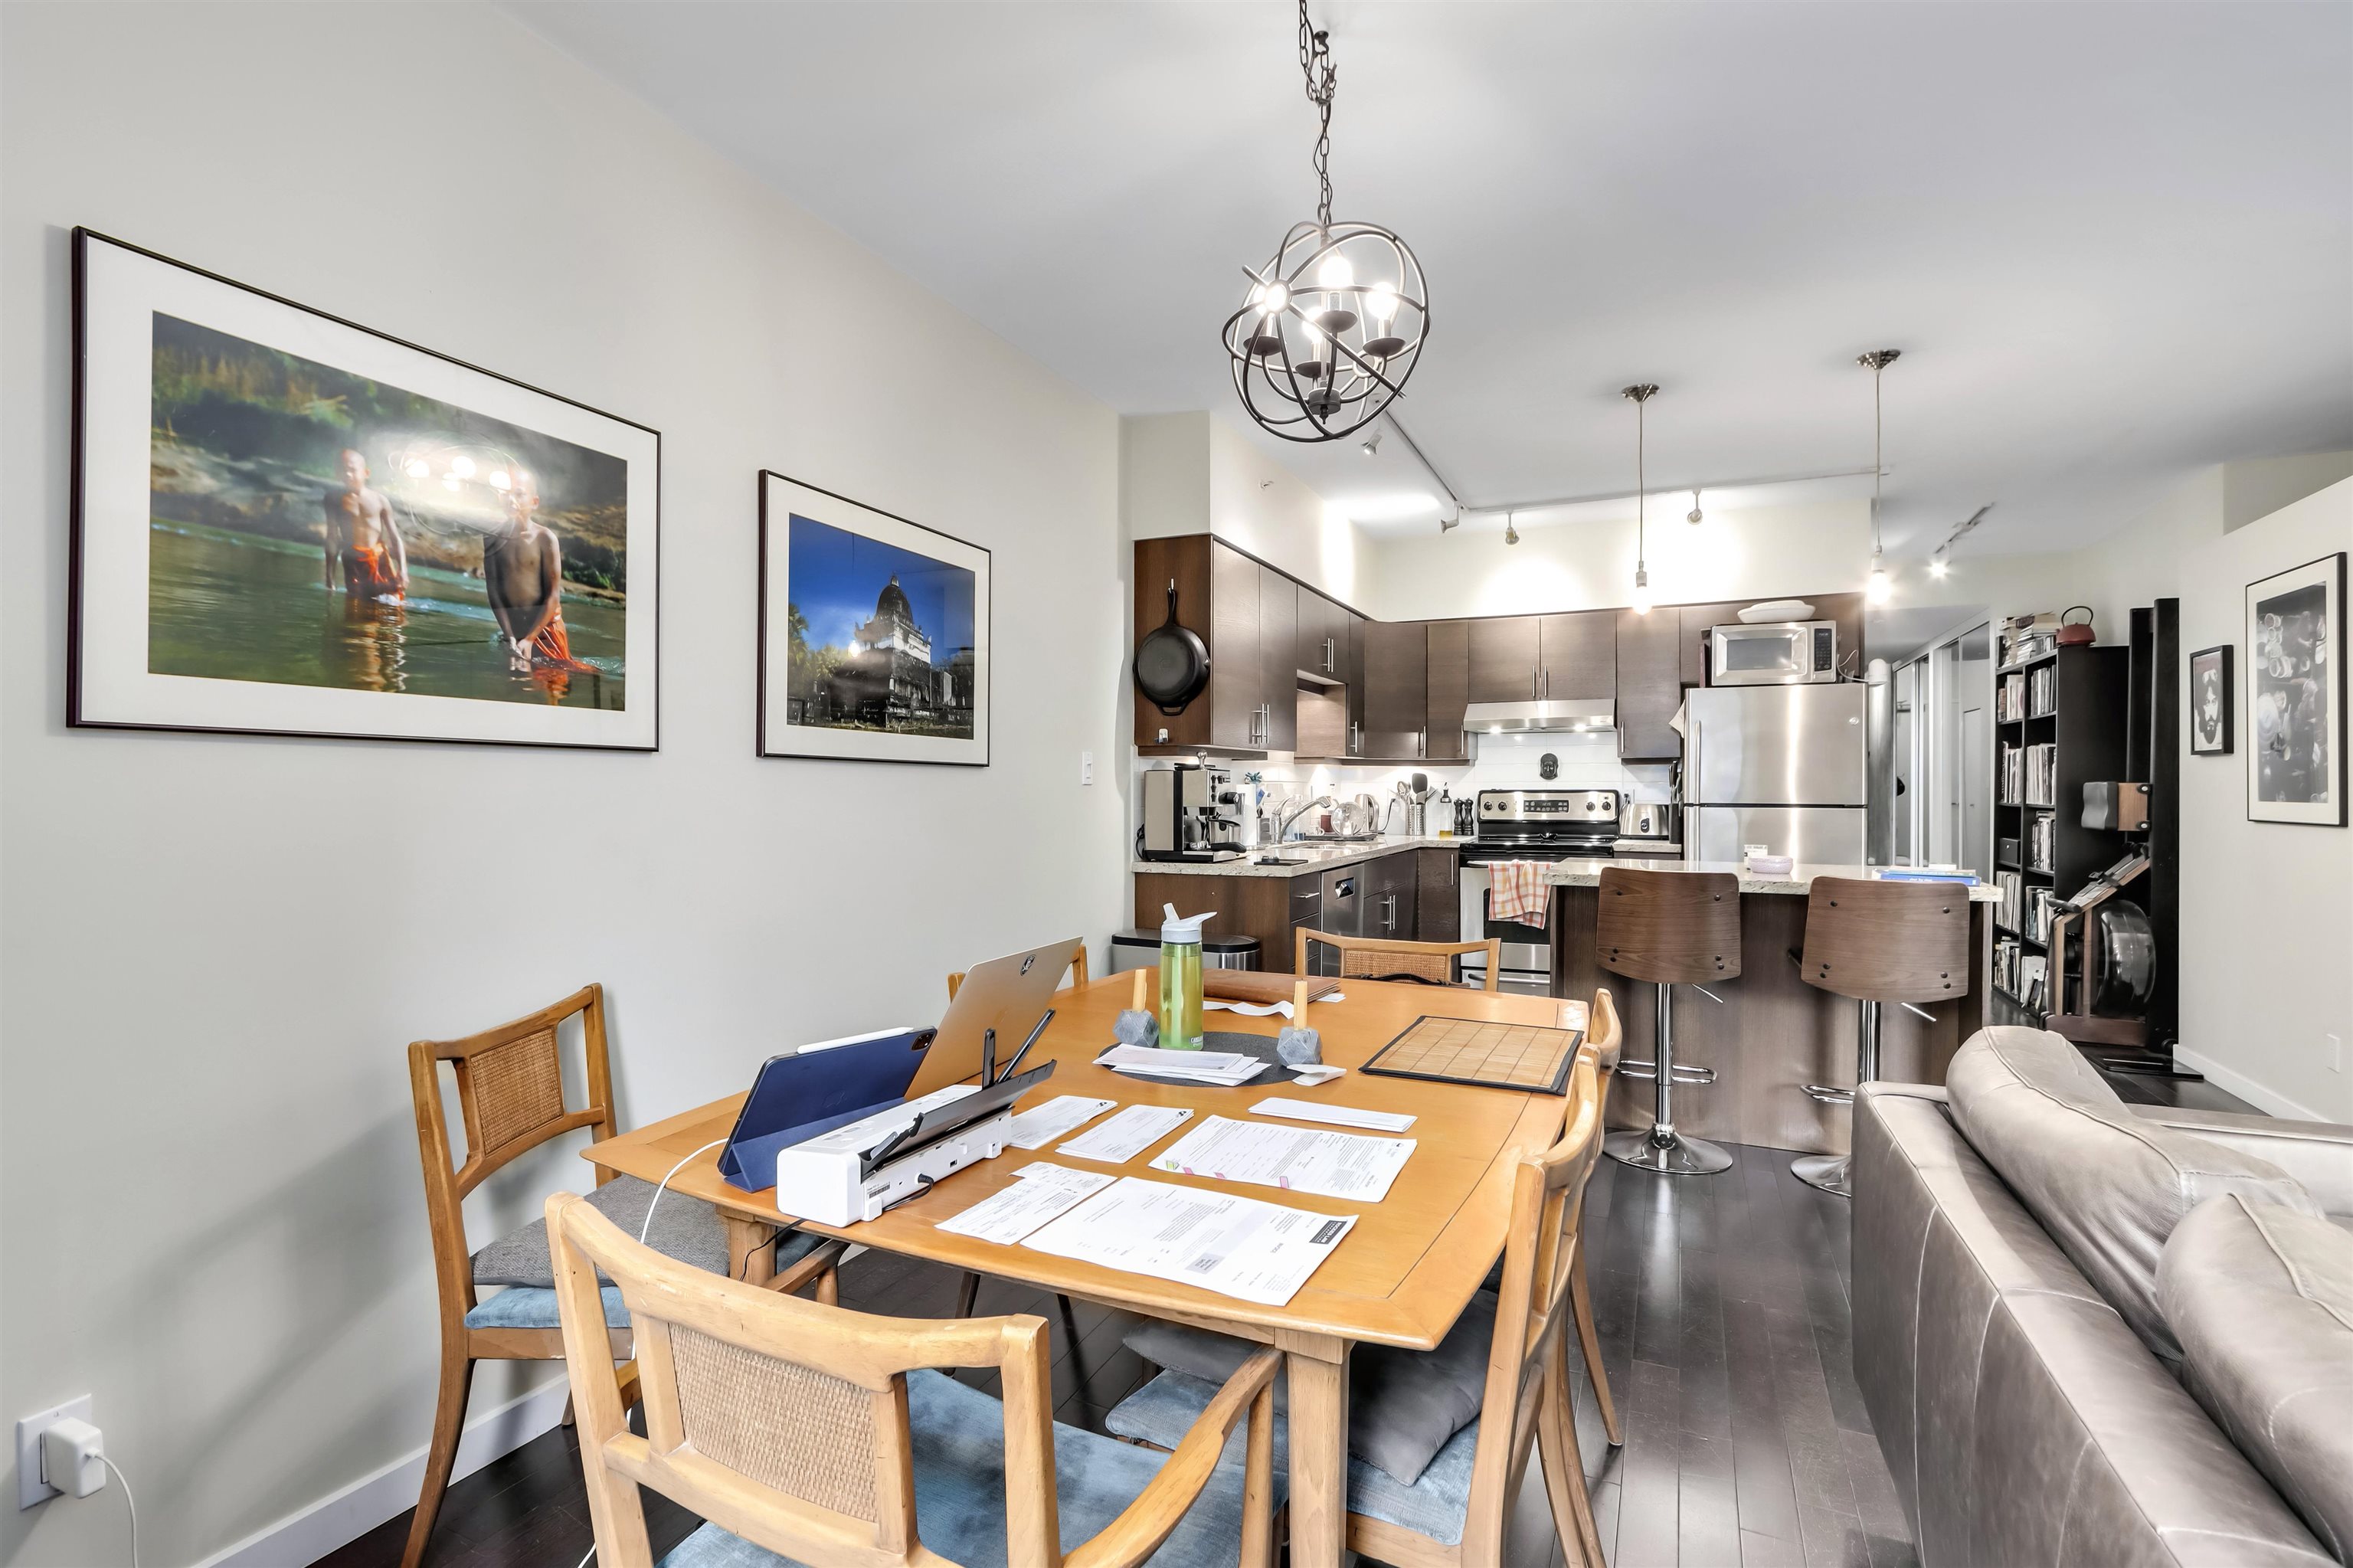 Listing image of 205 88 LONSDALE AVENUE